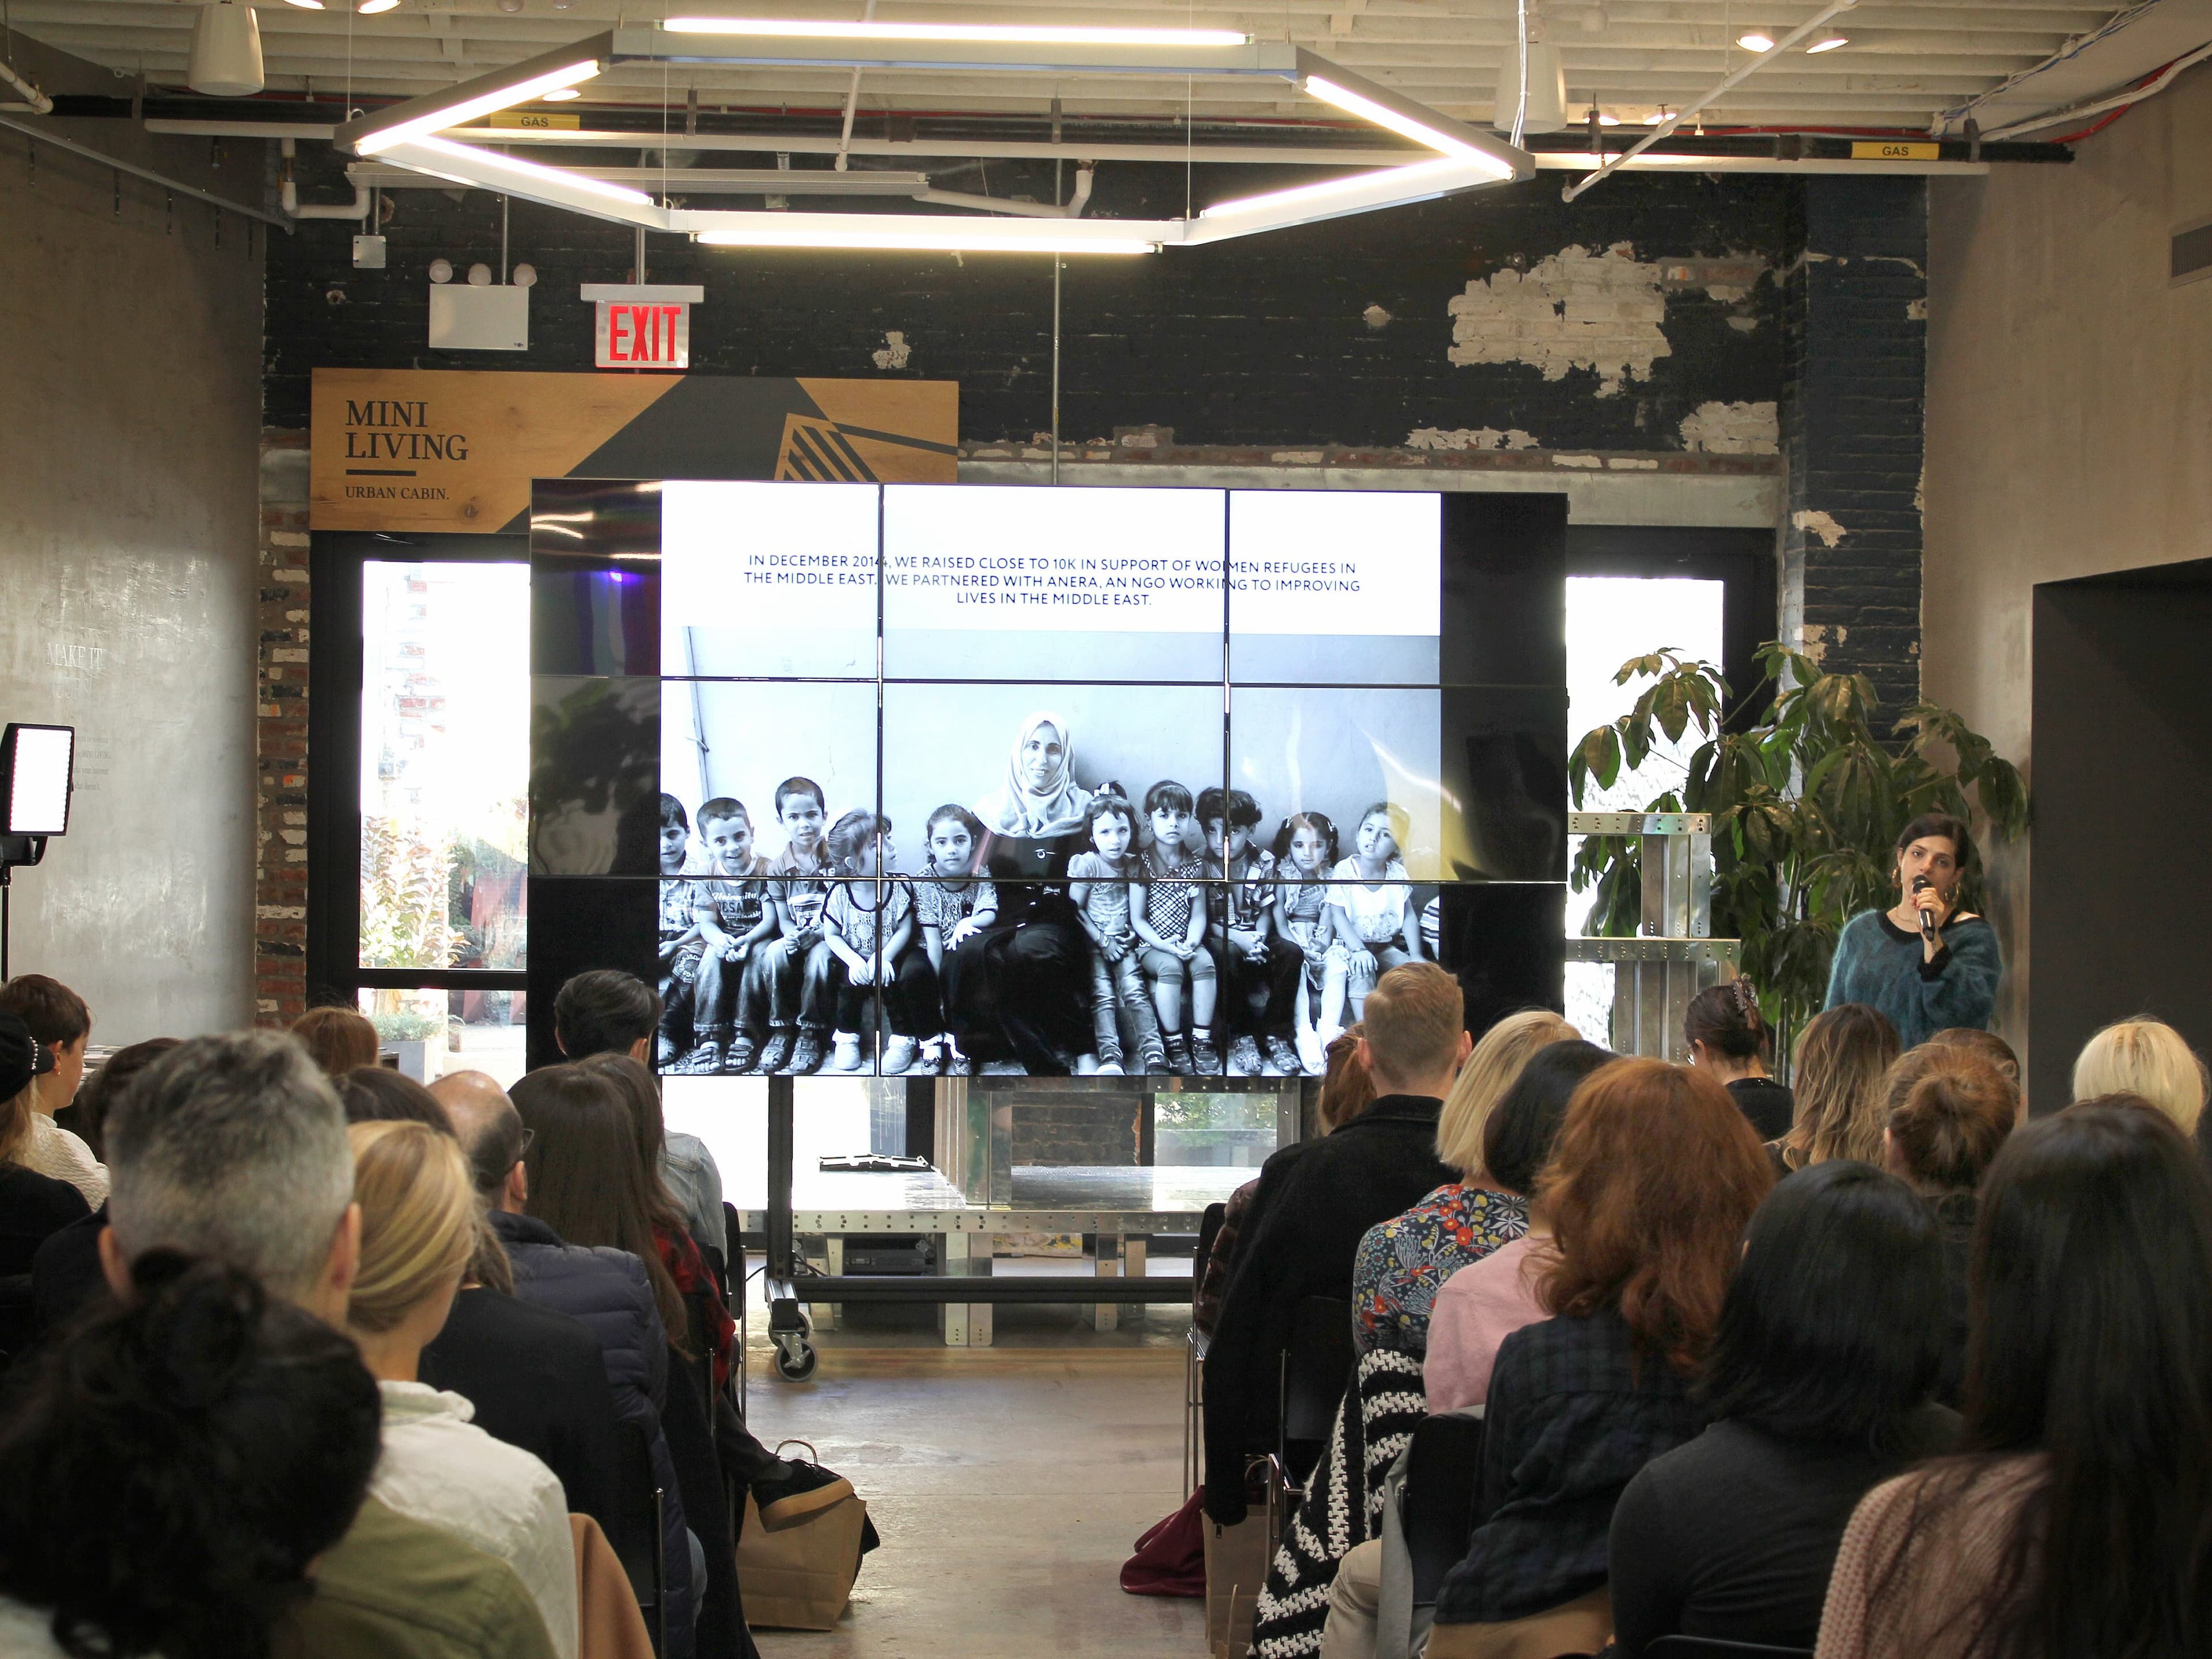 A group of people sit in chairs facing a large screen, listening to a speaker. The screen shows a black and white photo of children sitting together. The event takes place in an industrial-style room with brick walls and overhead lighting.